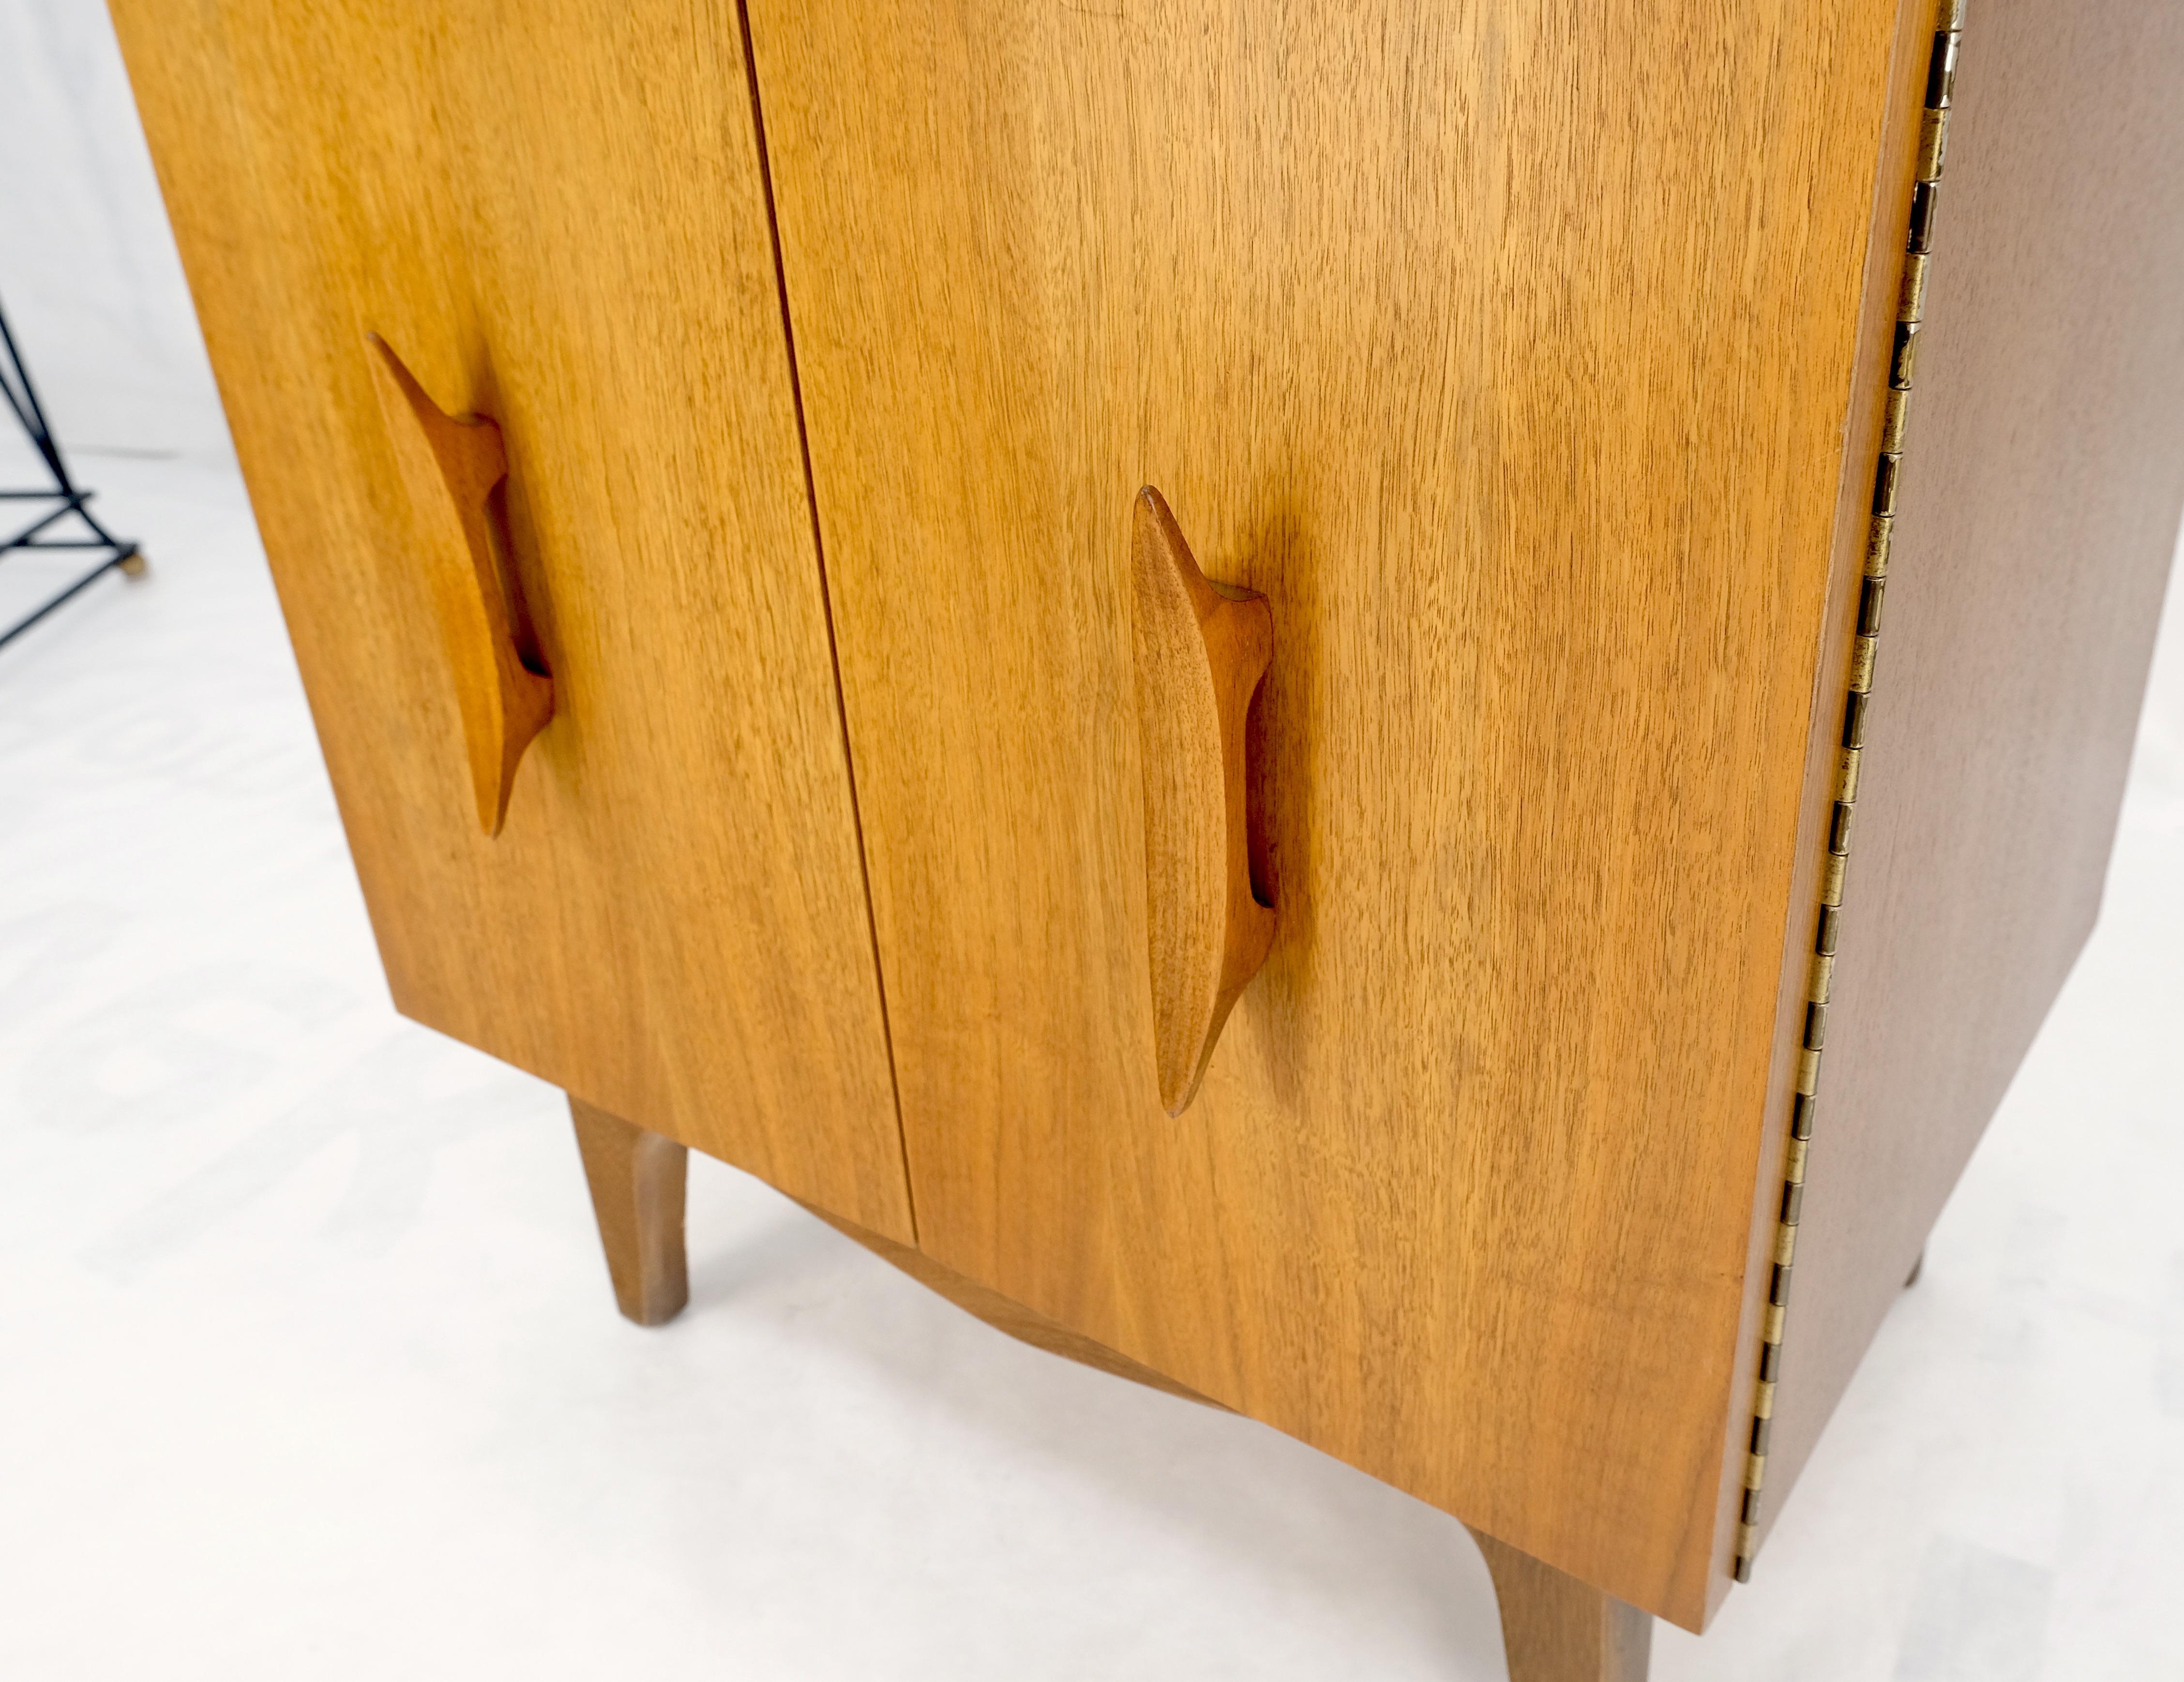 Lacquered Light Walnut Banana Shape Pulls Two Doors End Table Nightstand Mint! For Sale